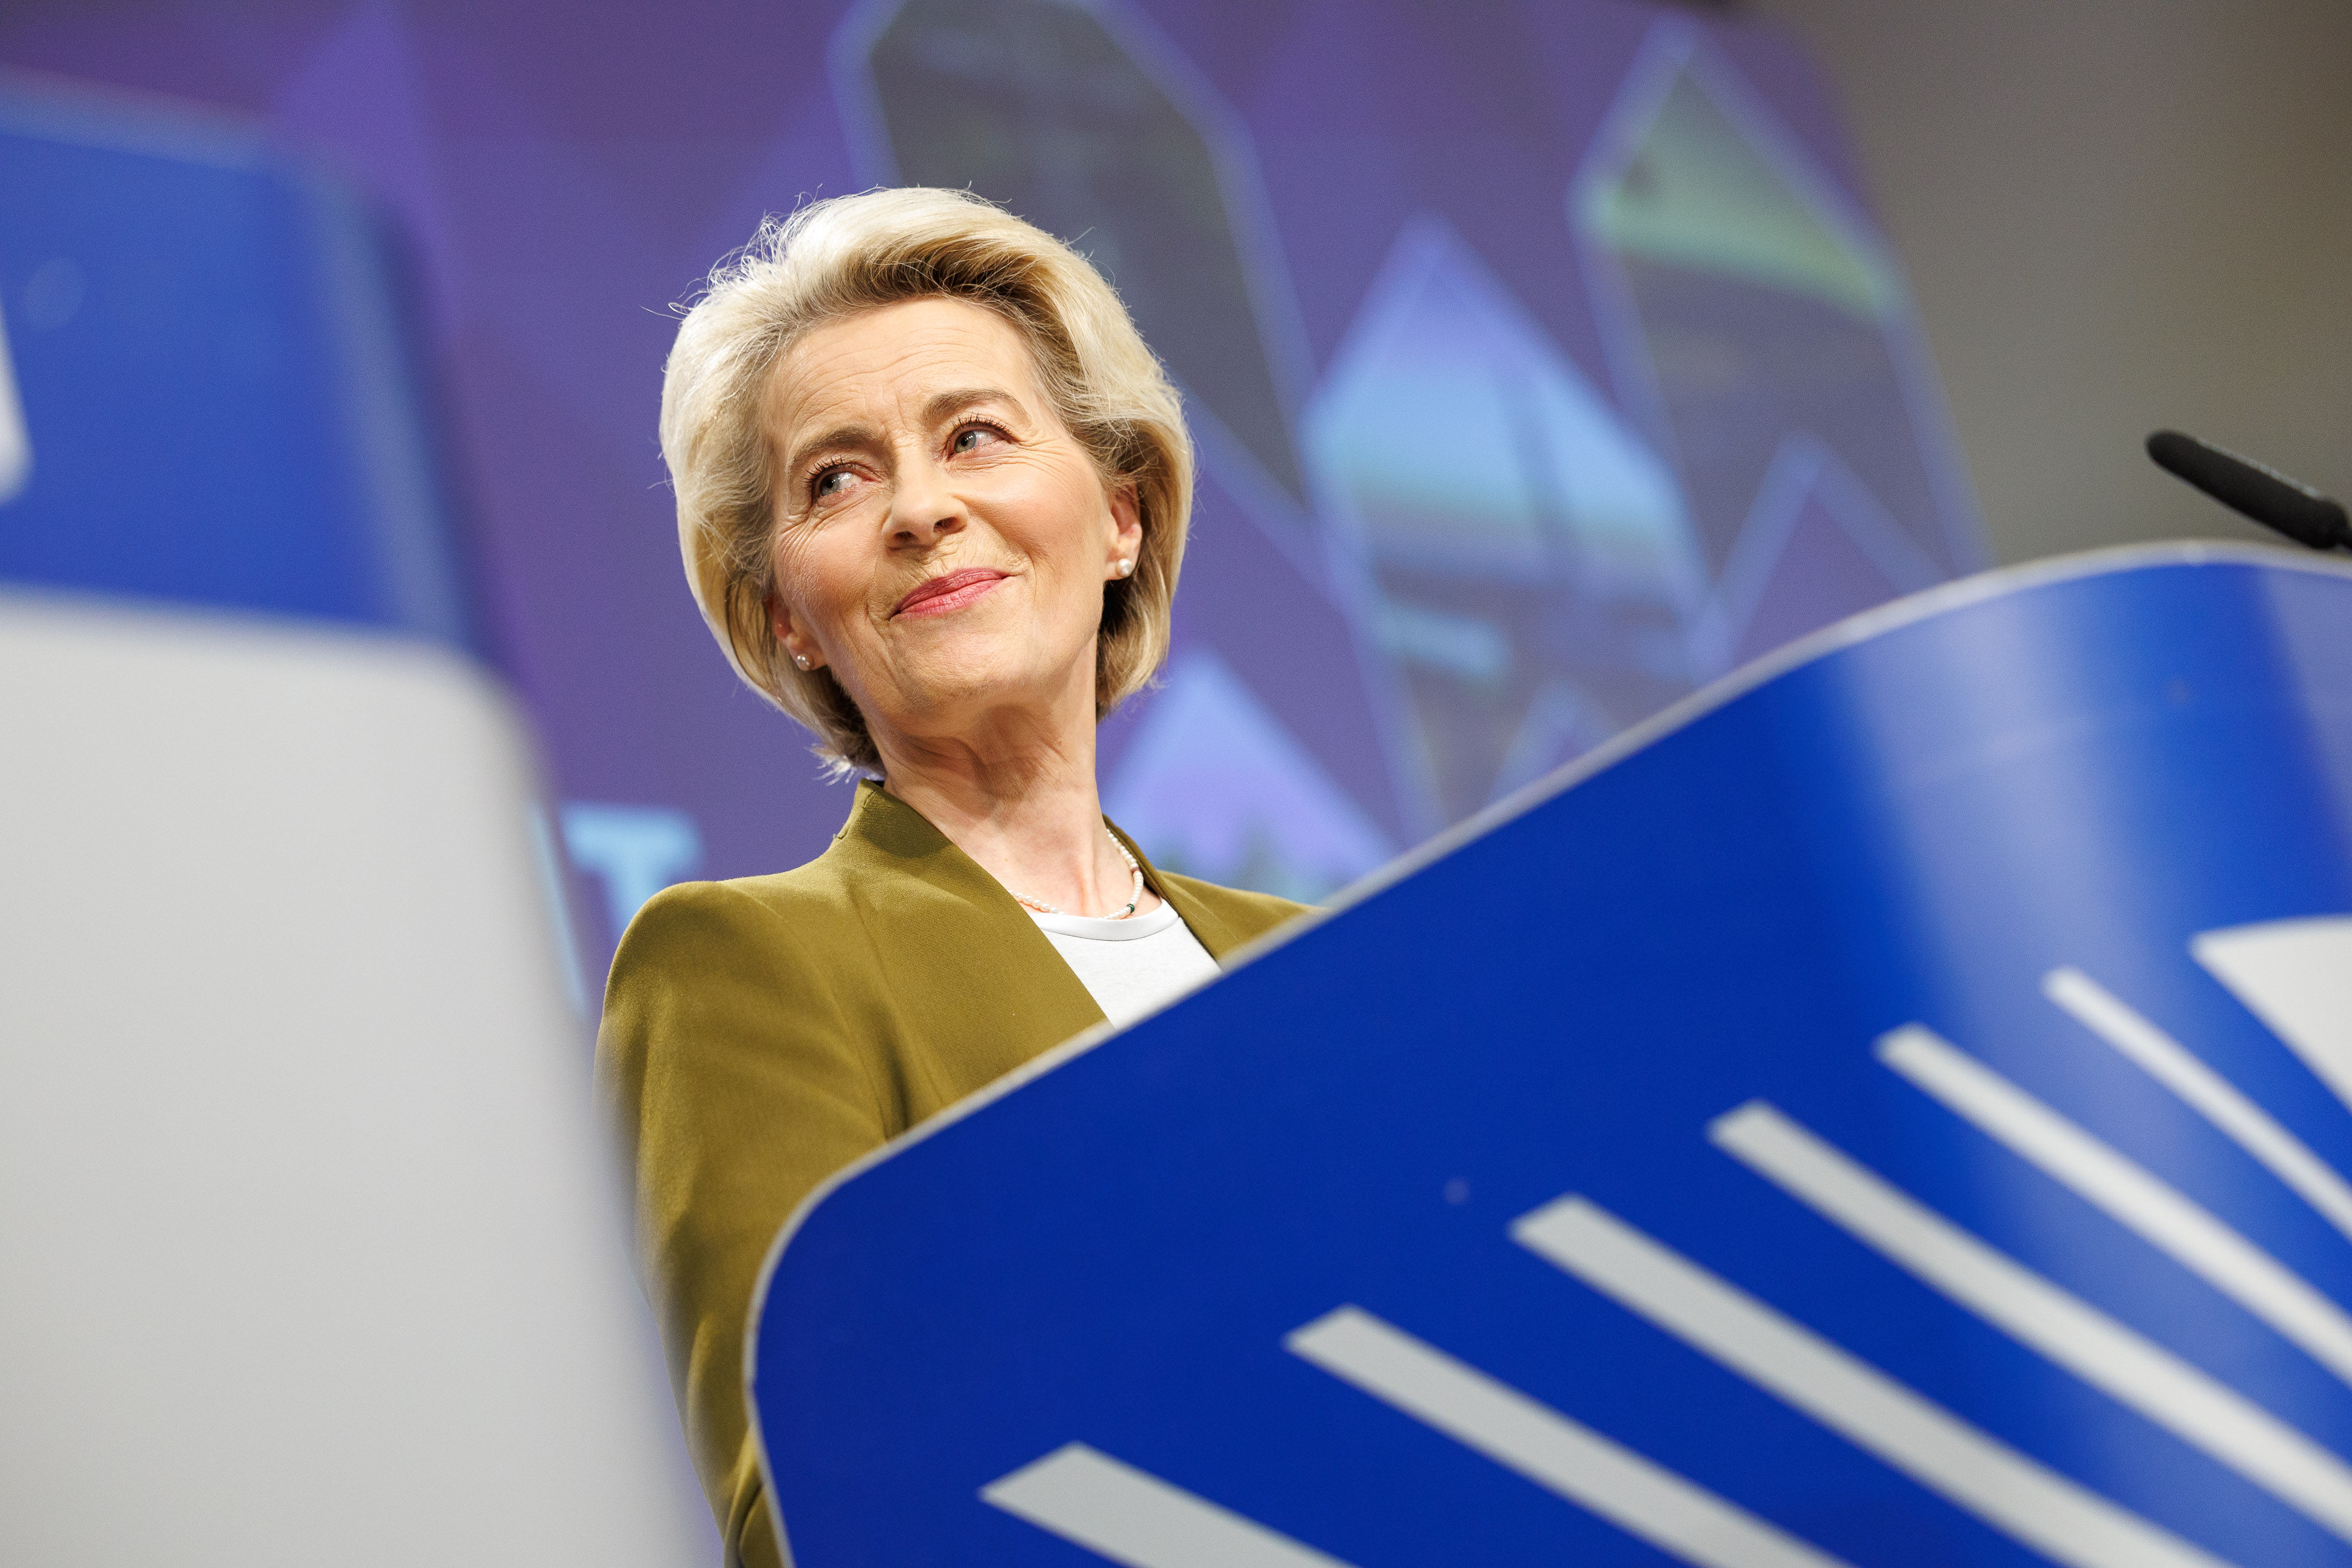 European Commission President Ursula von der Leyen is painting a bleak picture of EU-China relations as she prepares to travel to Beijing next month for a summit. Photo: European Commission/dpa